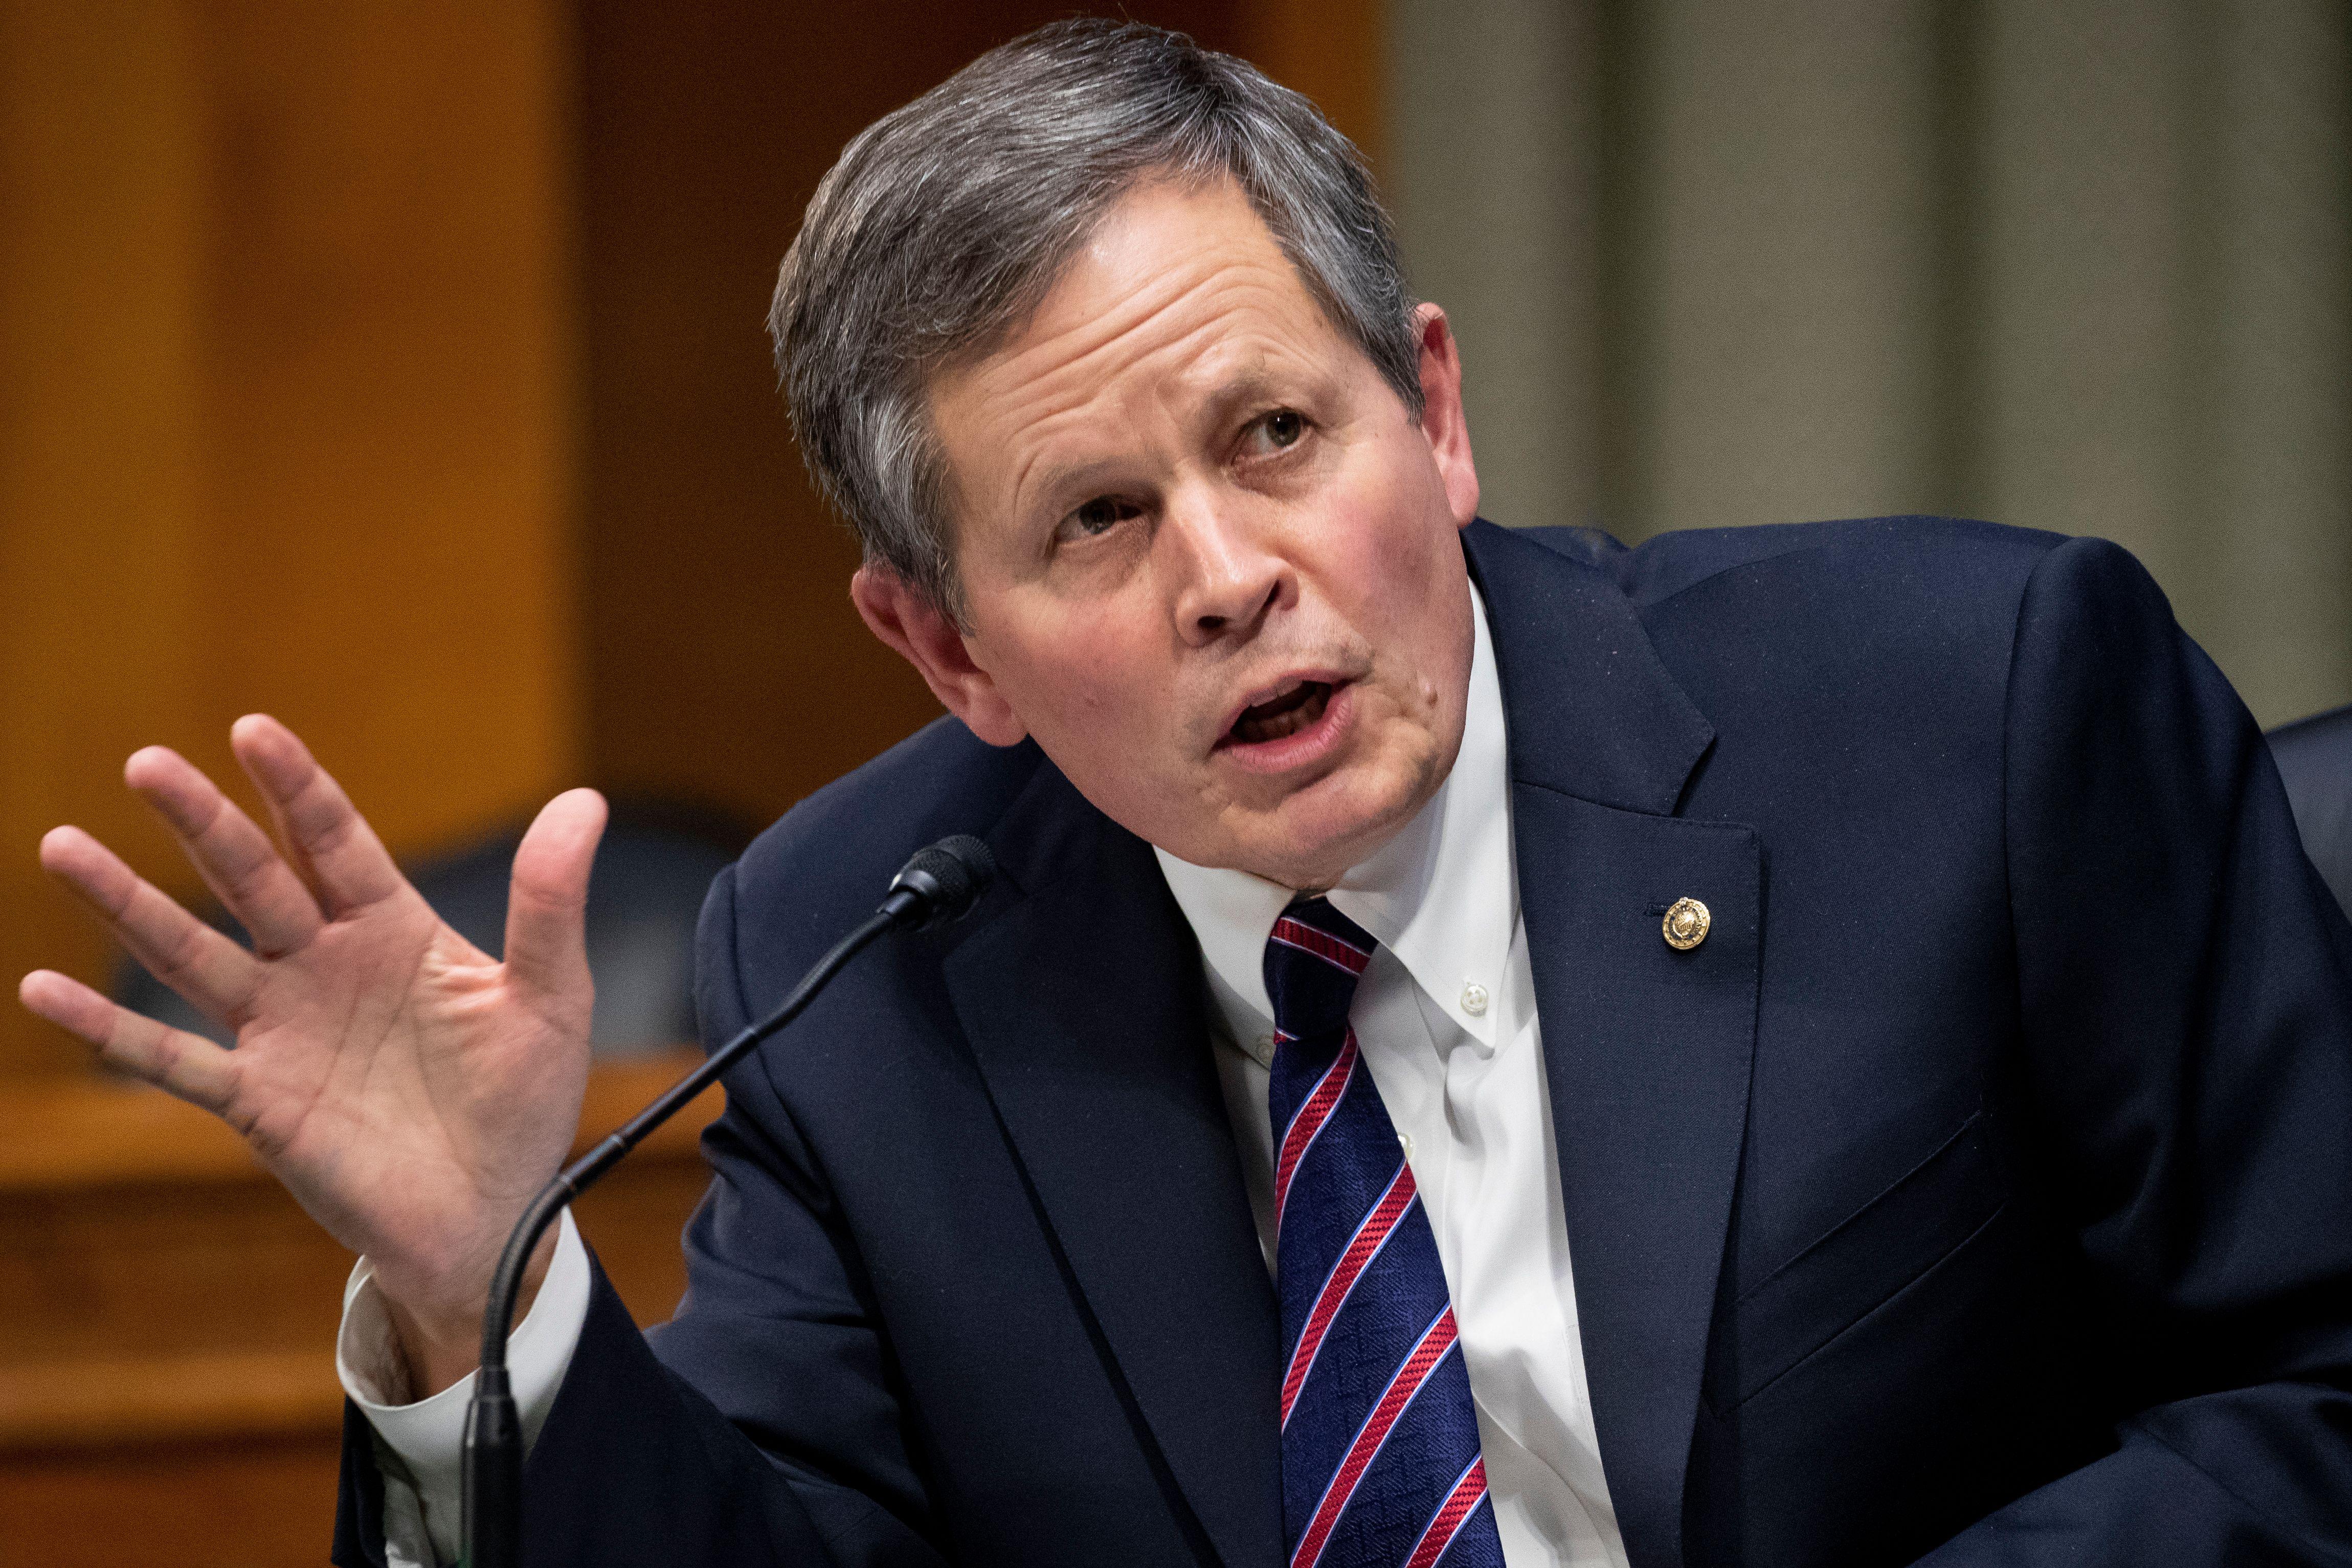 Republican Sen. Steve Daines from Montana directs a question regarding limiting abortions to Xavier Becerra during the Senate Finance Committee hearing on Becerra’s nomination to be secretary of Health and Human Services (HHS), on Capitol Hill in Washington, D.C. on February 24, 2021. 